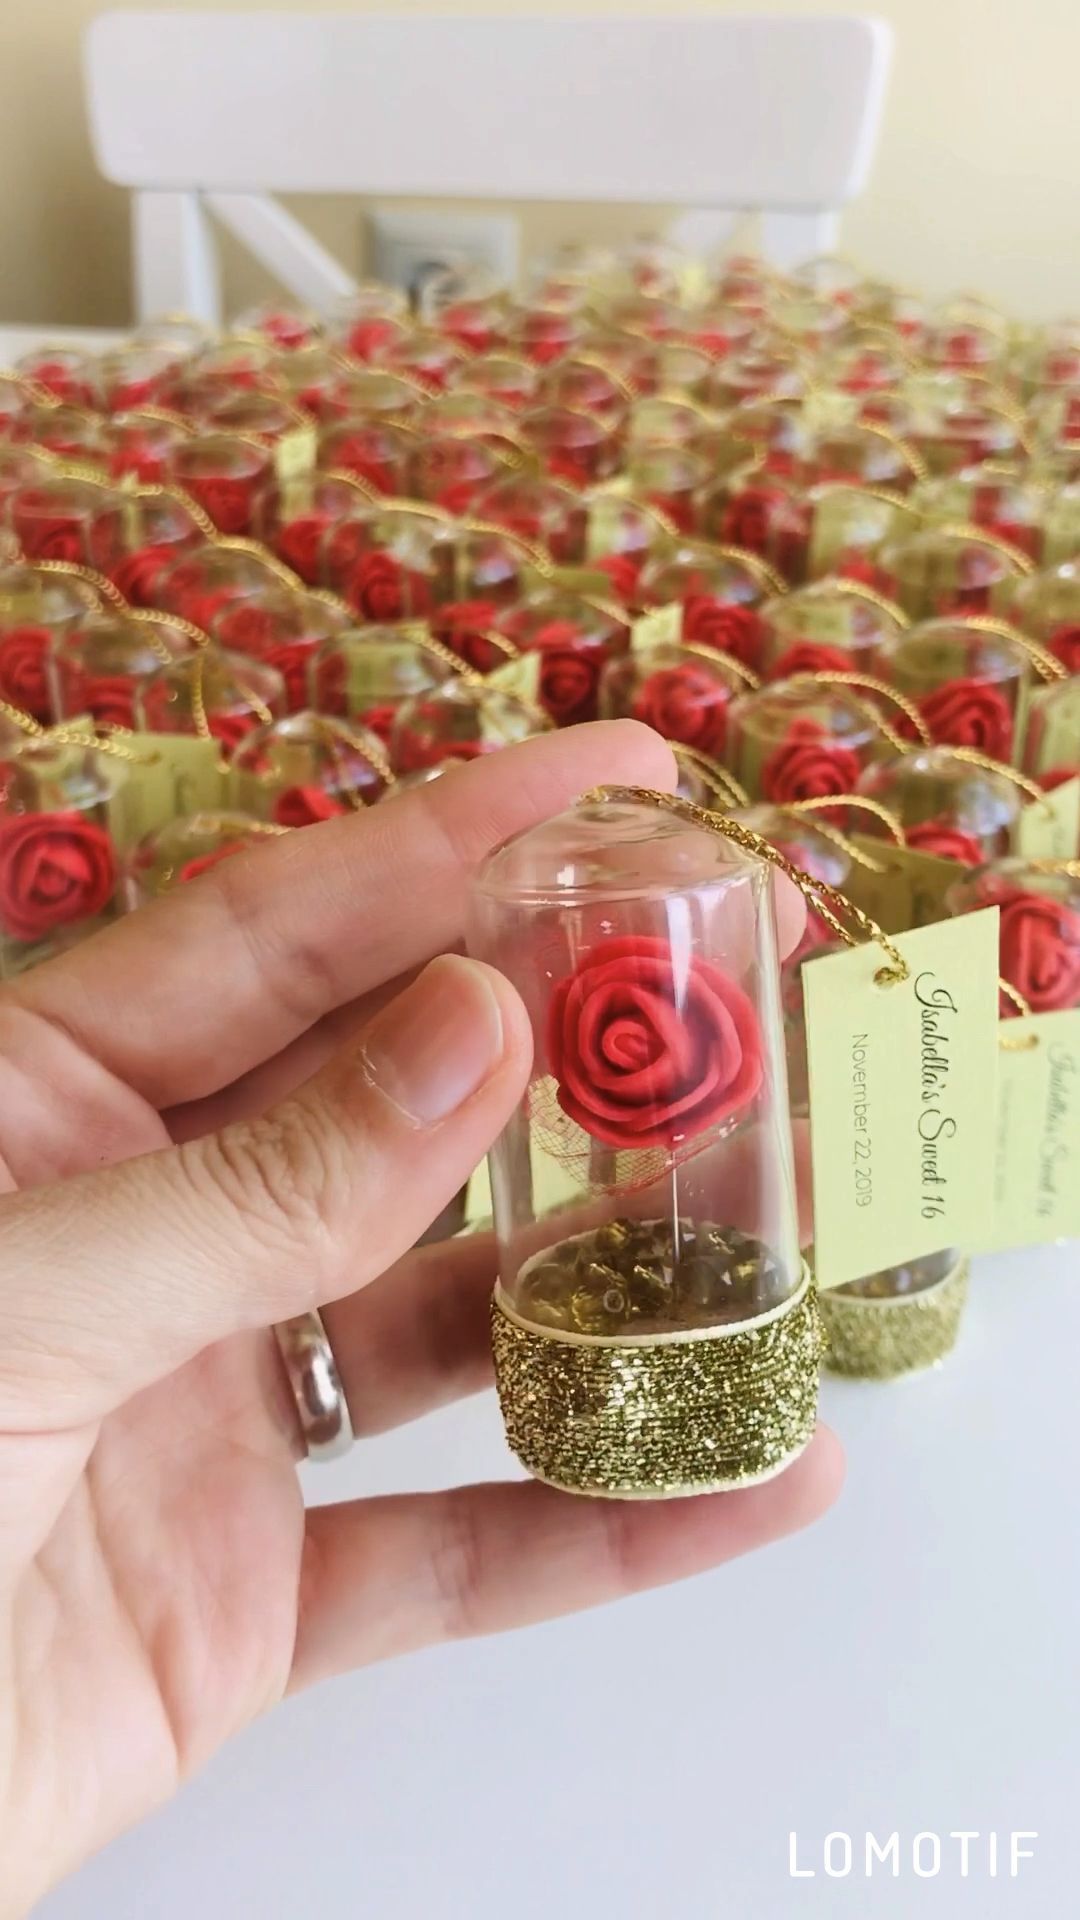 10pcs Red Rose Dome Favors, Wedding Favors, Beauty and the Beast Favors, Belle Favors, Glass Dome, Sweet 16, Bridal Shower, Birthday Favors -   19 disney wedding ideas